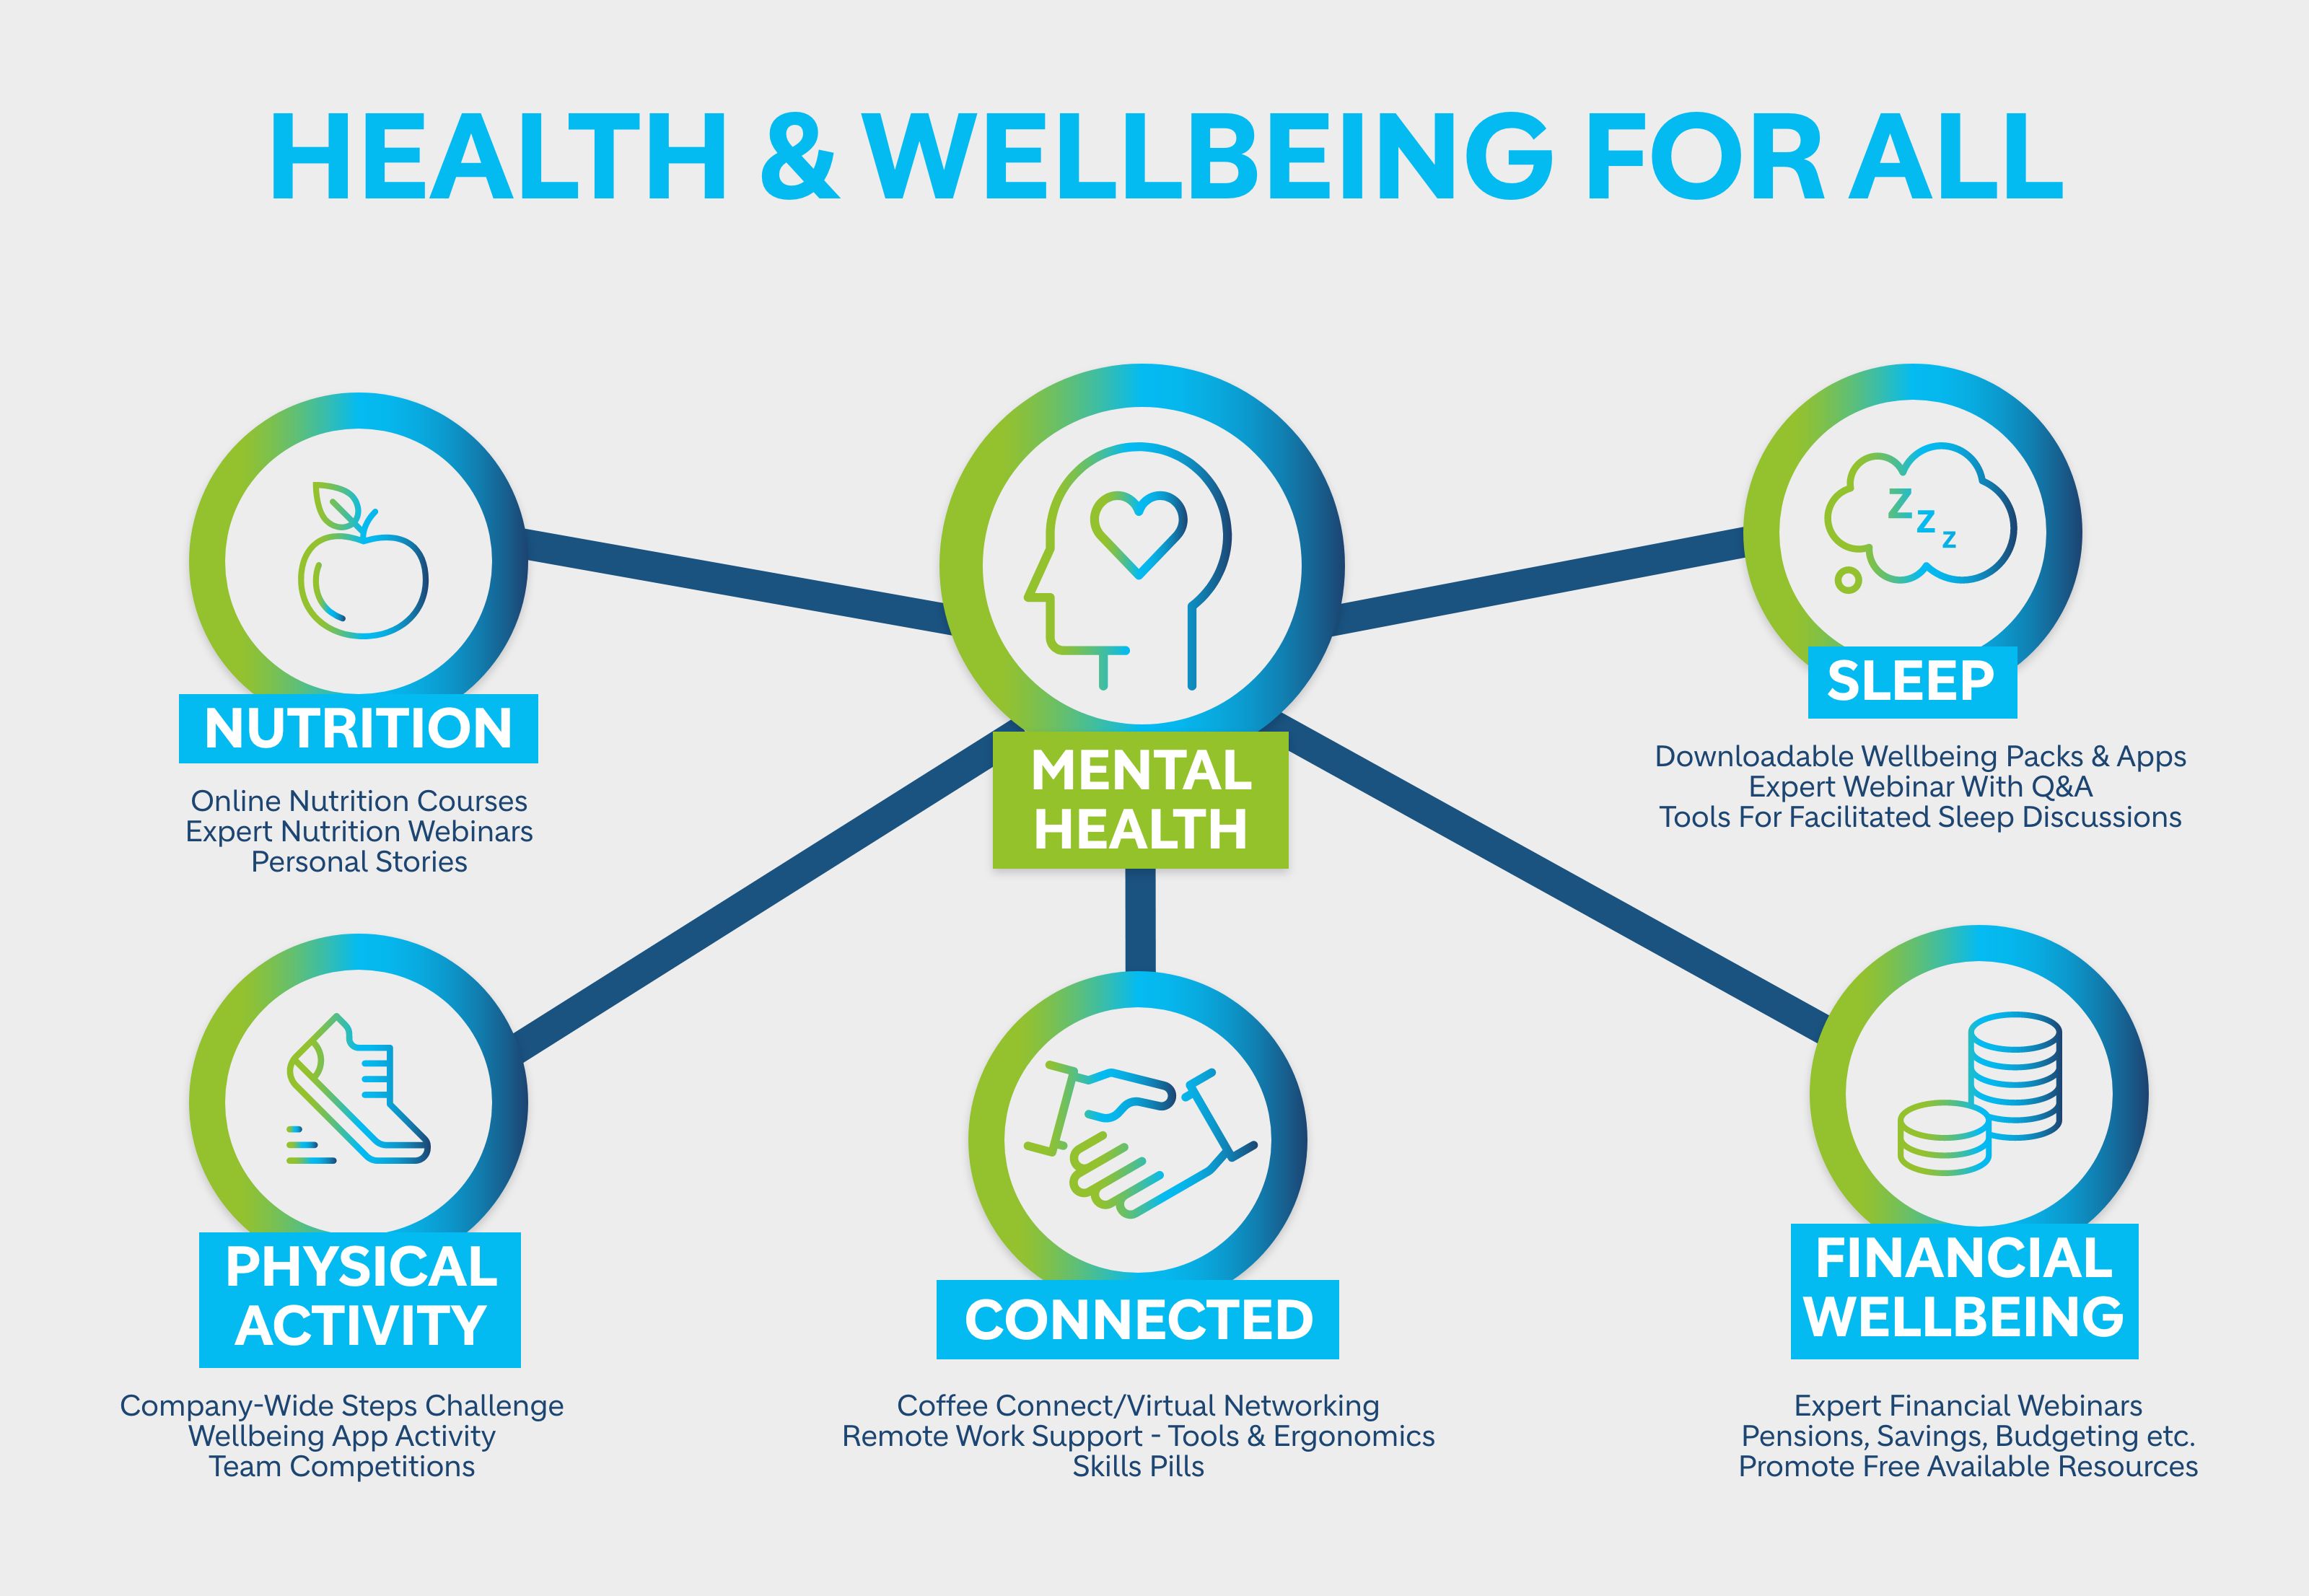 UK mental health wellbeing infographic